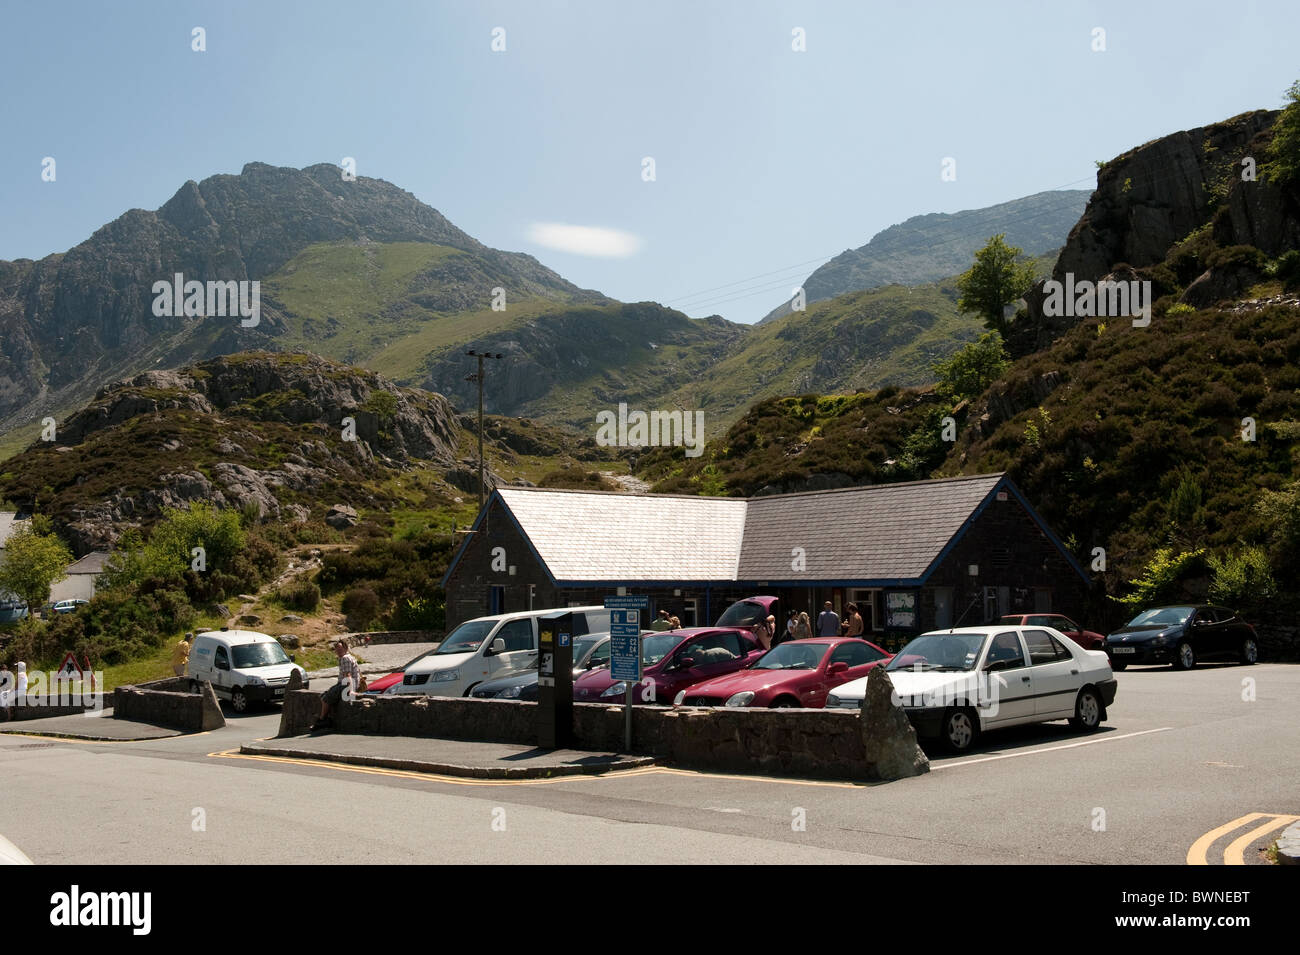 Climbers Cafe and Car Park in Snowdonia Capel Curig Stock Photo